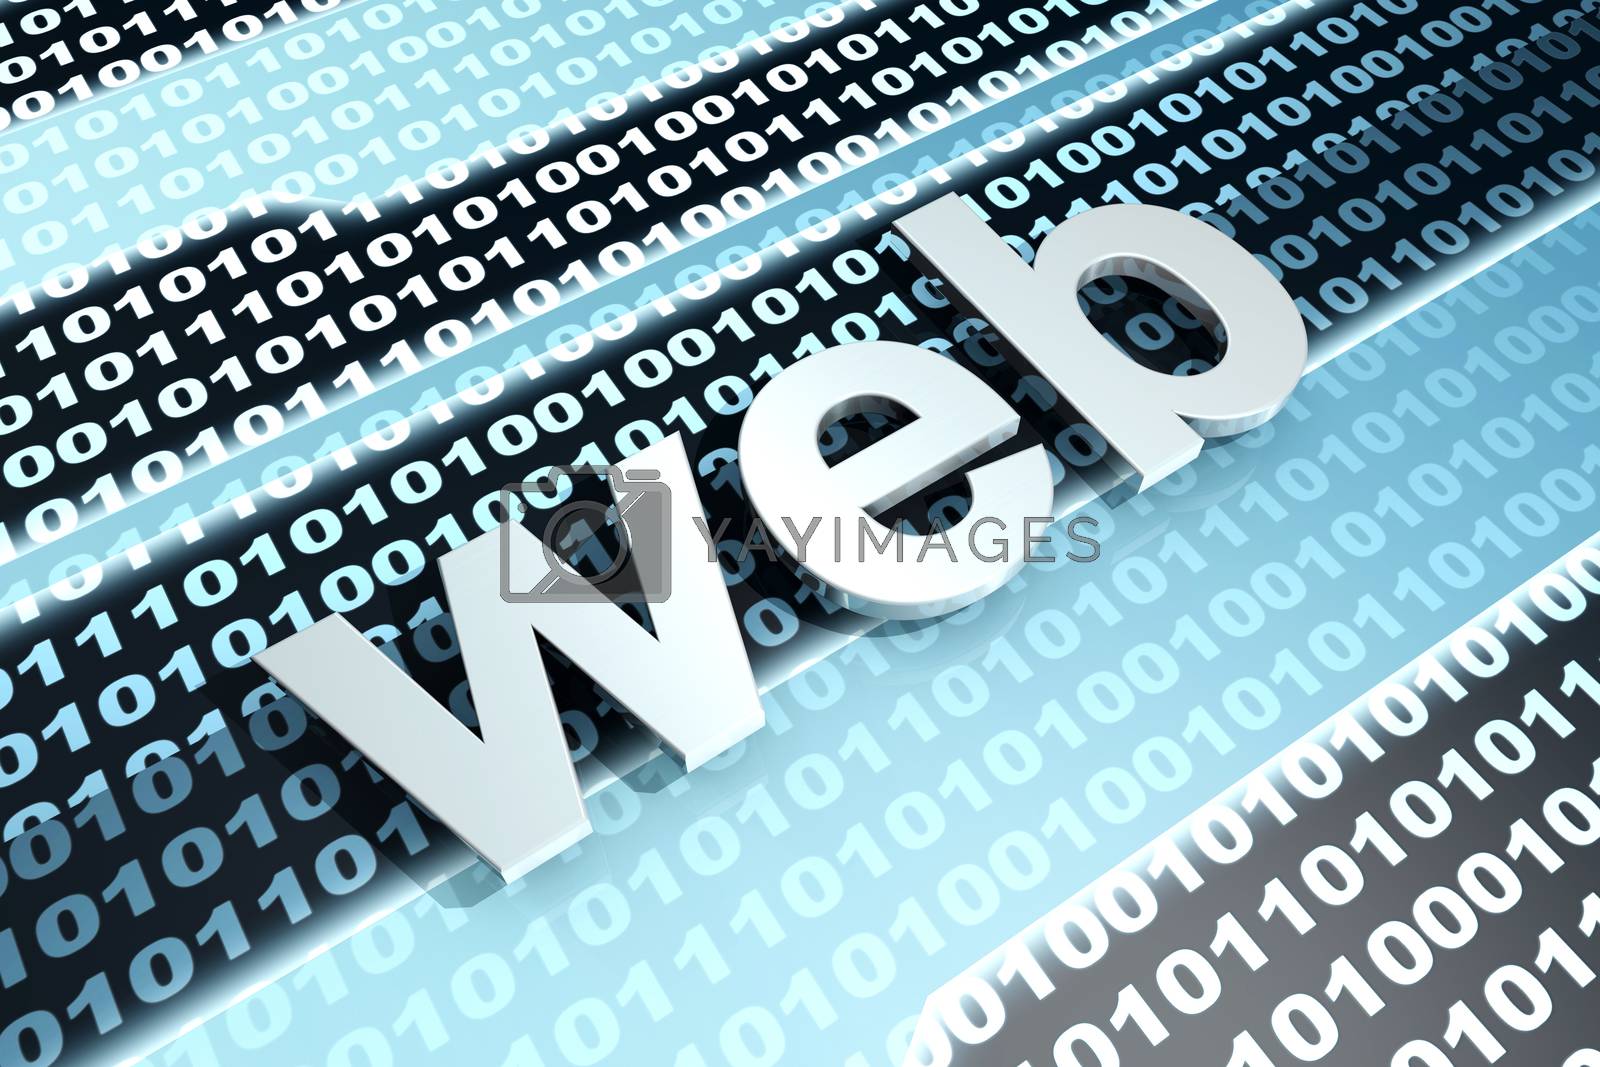 Royalty free image of Web by Spectral